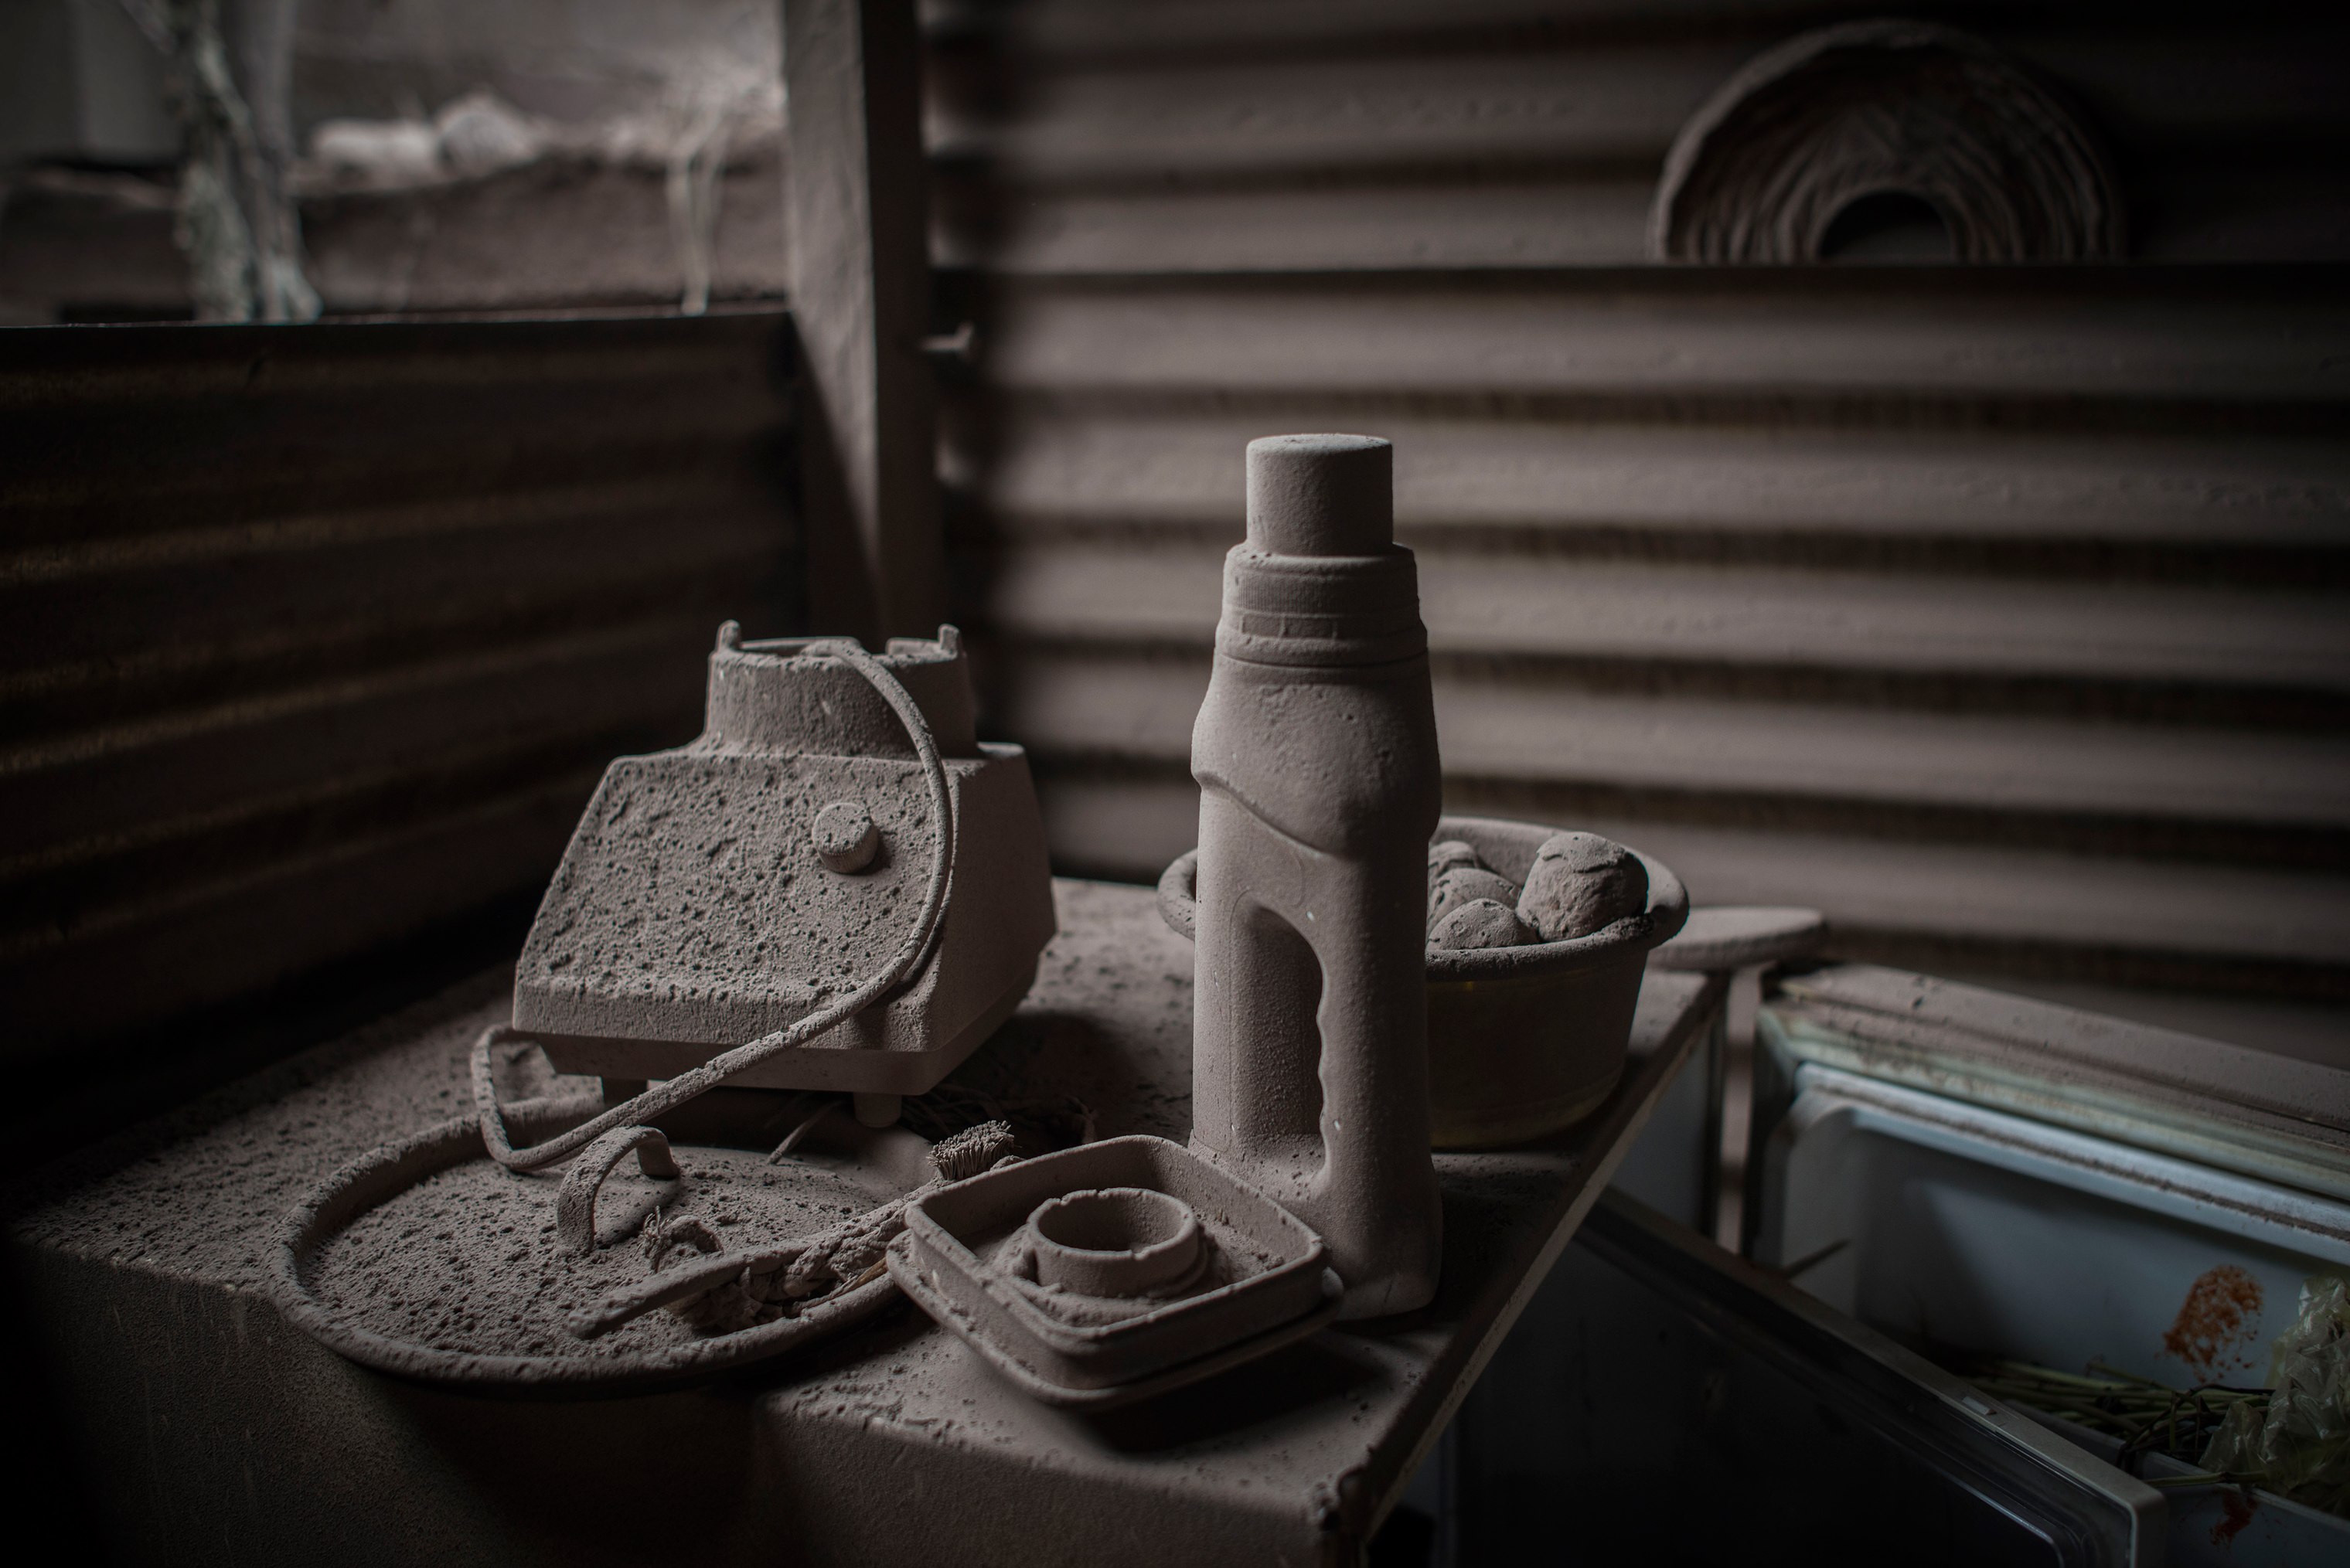 Ash-covered home goods, including parts of a blender, in an abandoned home in San Miguel Los Lotes on June 5. (Daniele Volpe)